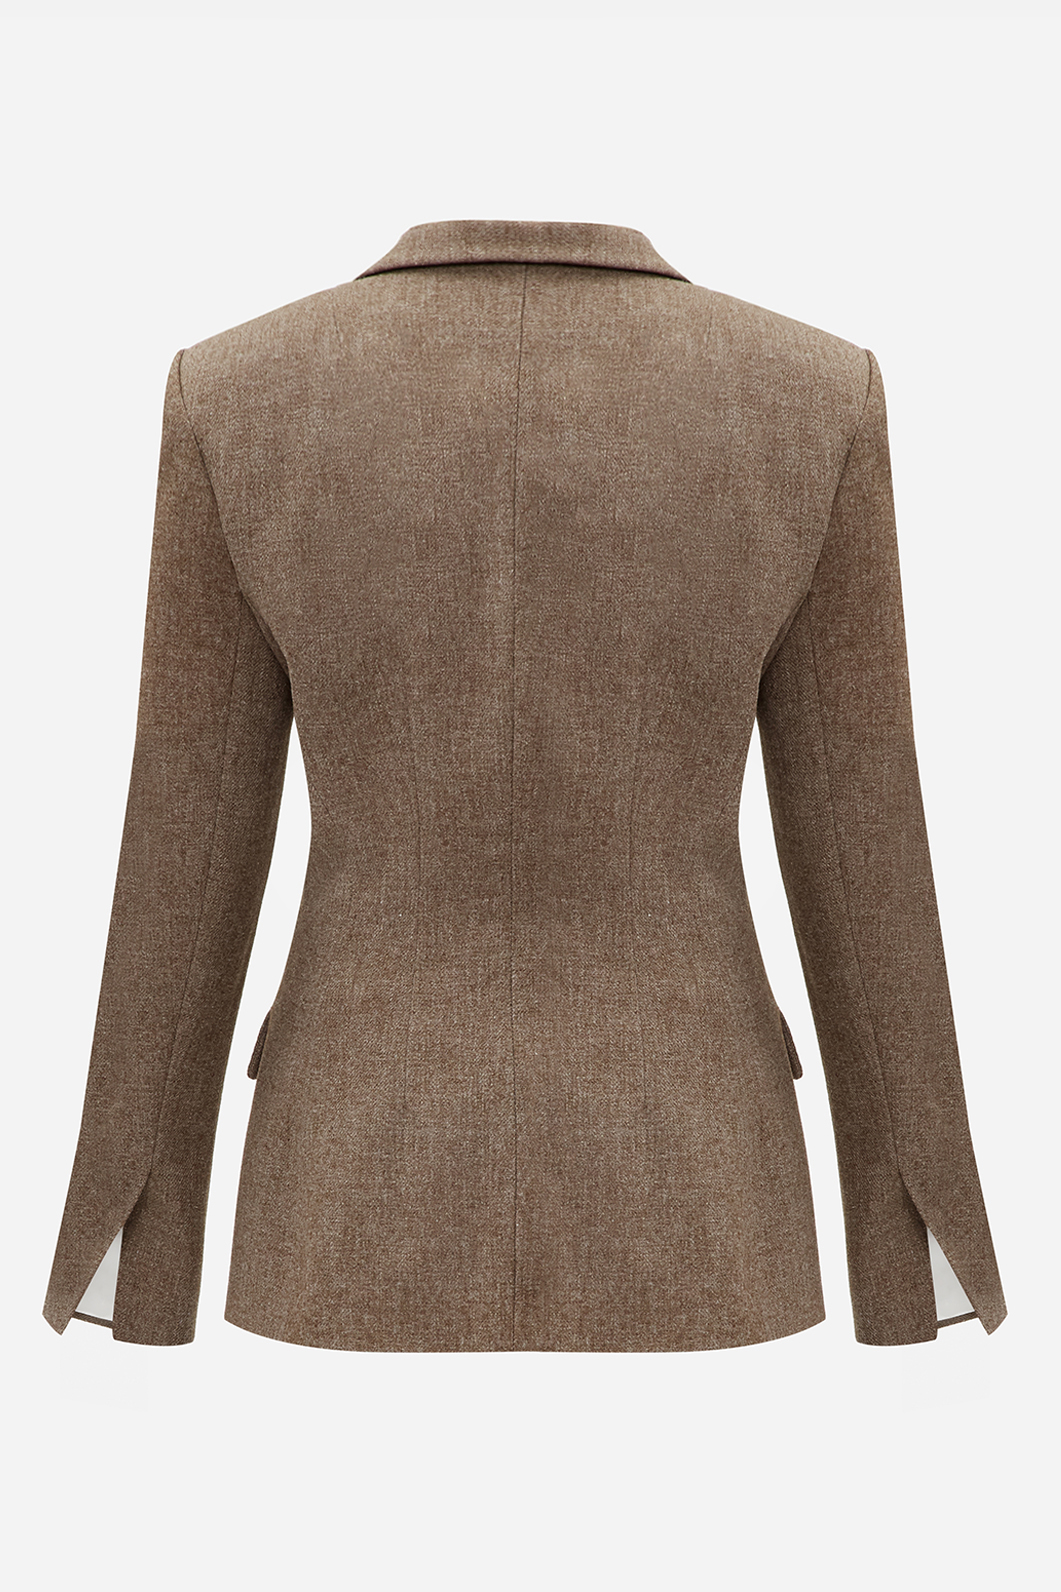 Brown wool fitted jacket